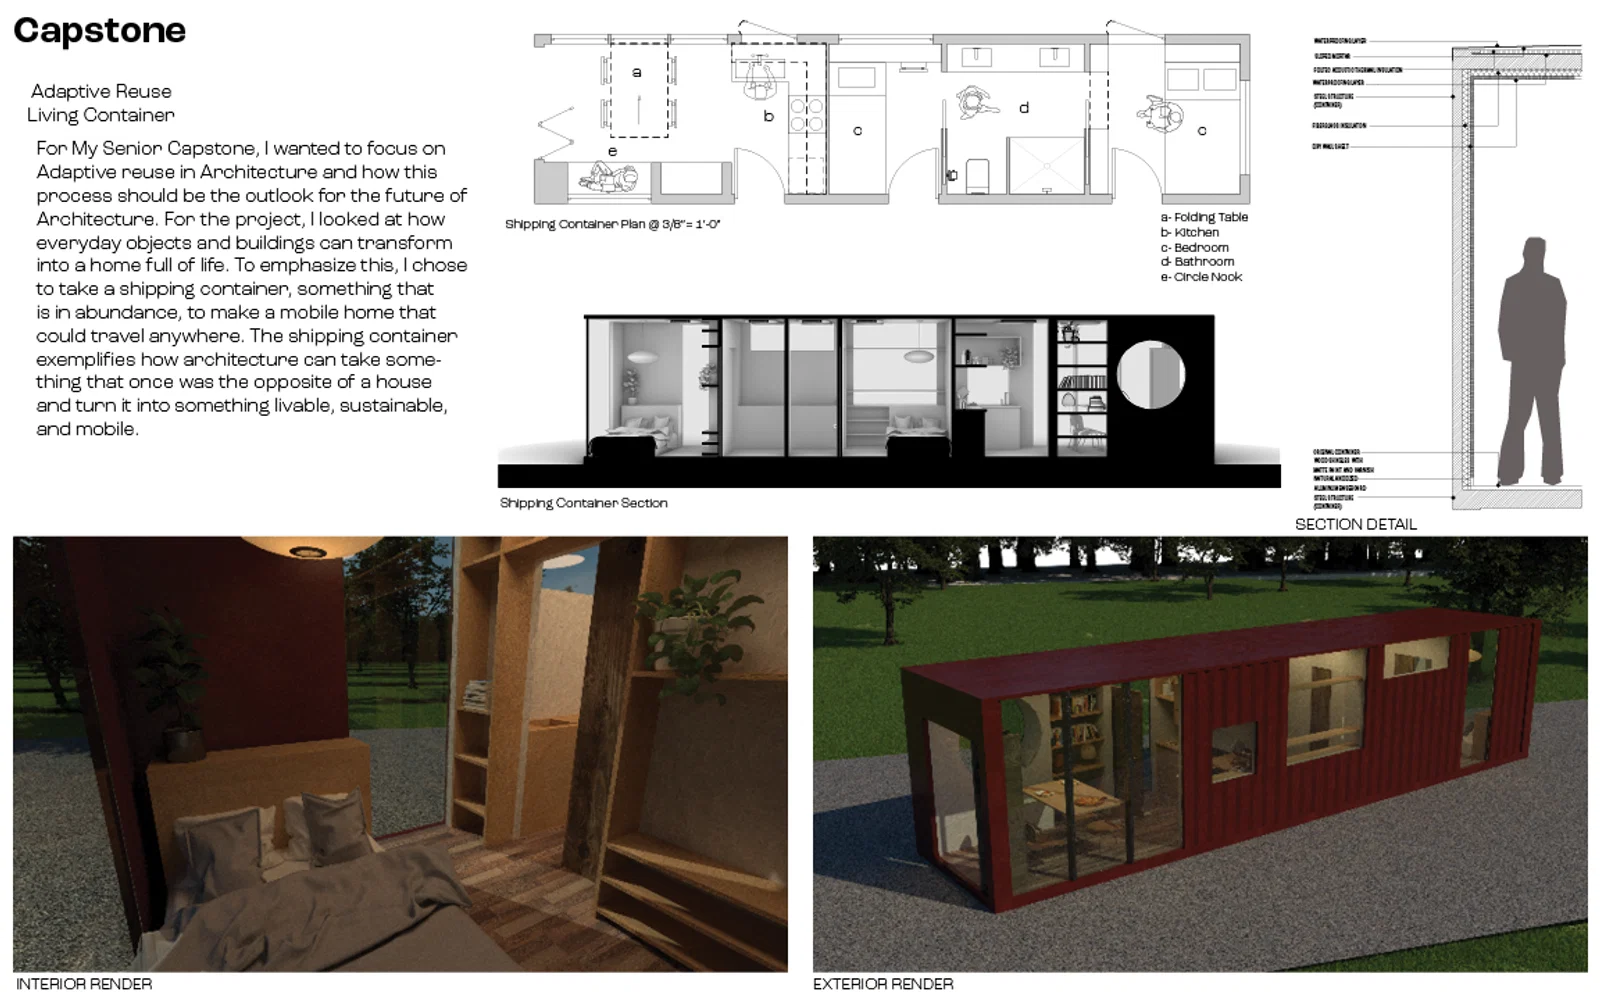 This is the images for my capstone. There is the plan in the top with a section underneath. There is two renders that show the interior and exterior of the shipping container. There is also a section Detail drawing that shows the wall structure. 